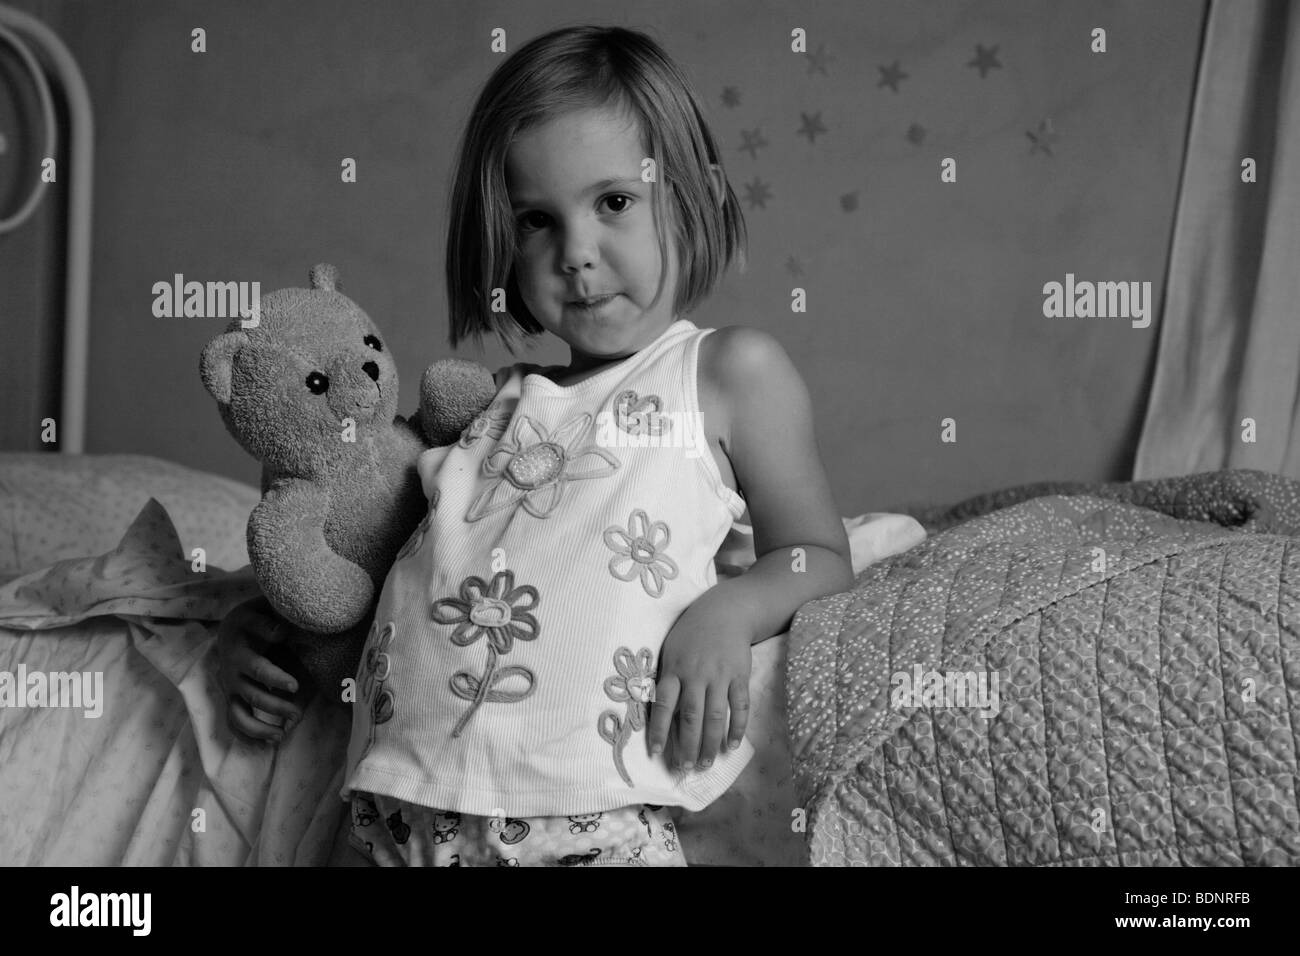 Black and white portrait of young girl holding teddy bear in bedroom Stock Photo